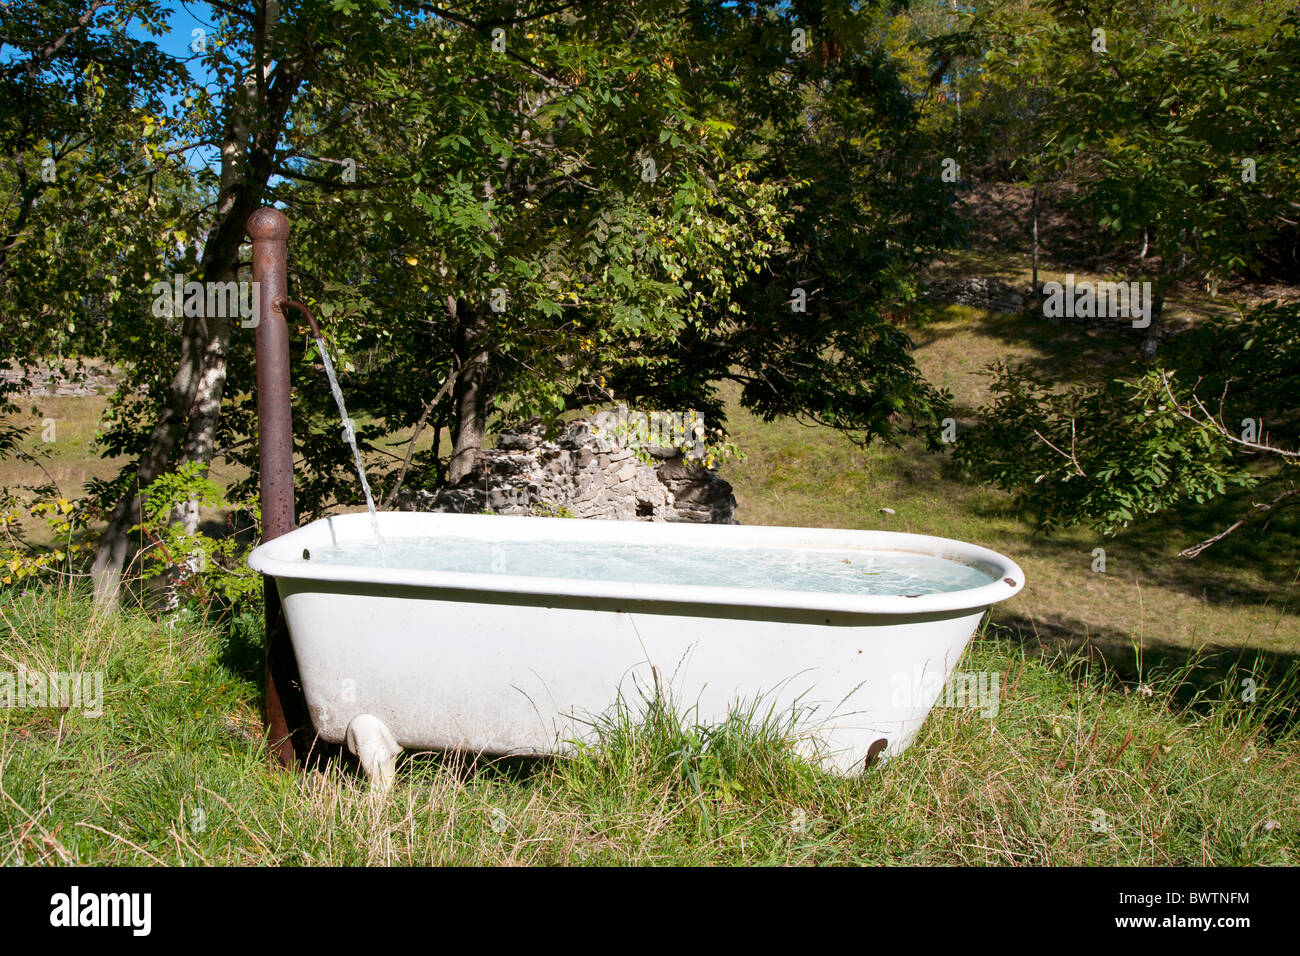 https://c8.alamy.com/comp/BWTNFM/bathtub-placed-in-countryside-and-used-as-spring-water-trough-exilles-BWTNFM.jpg